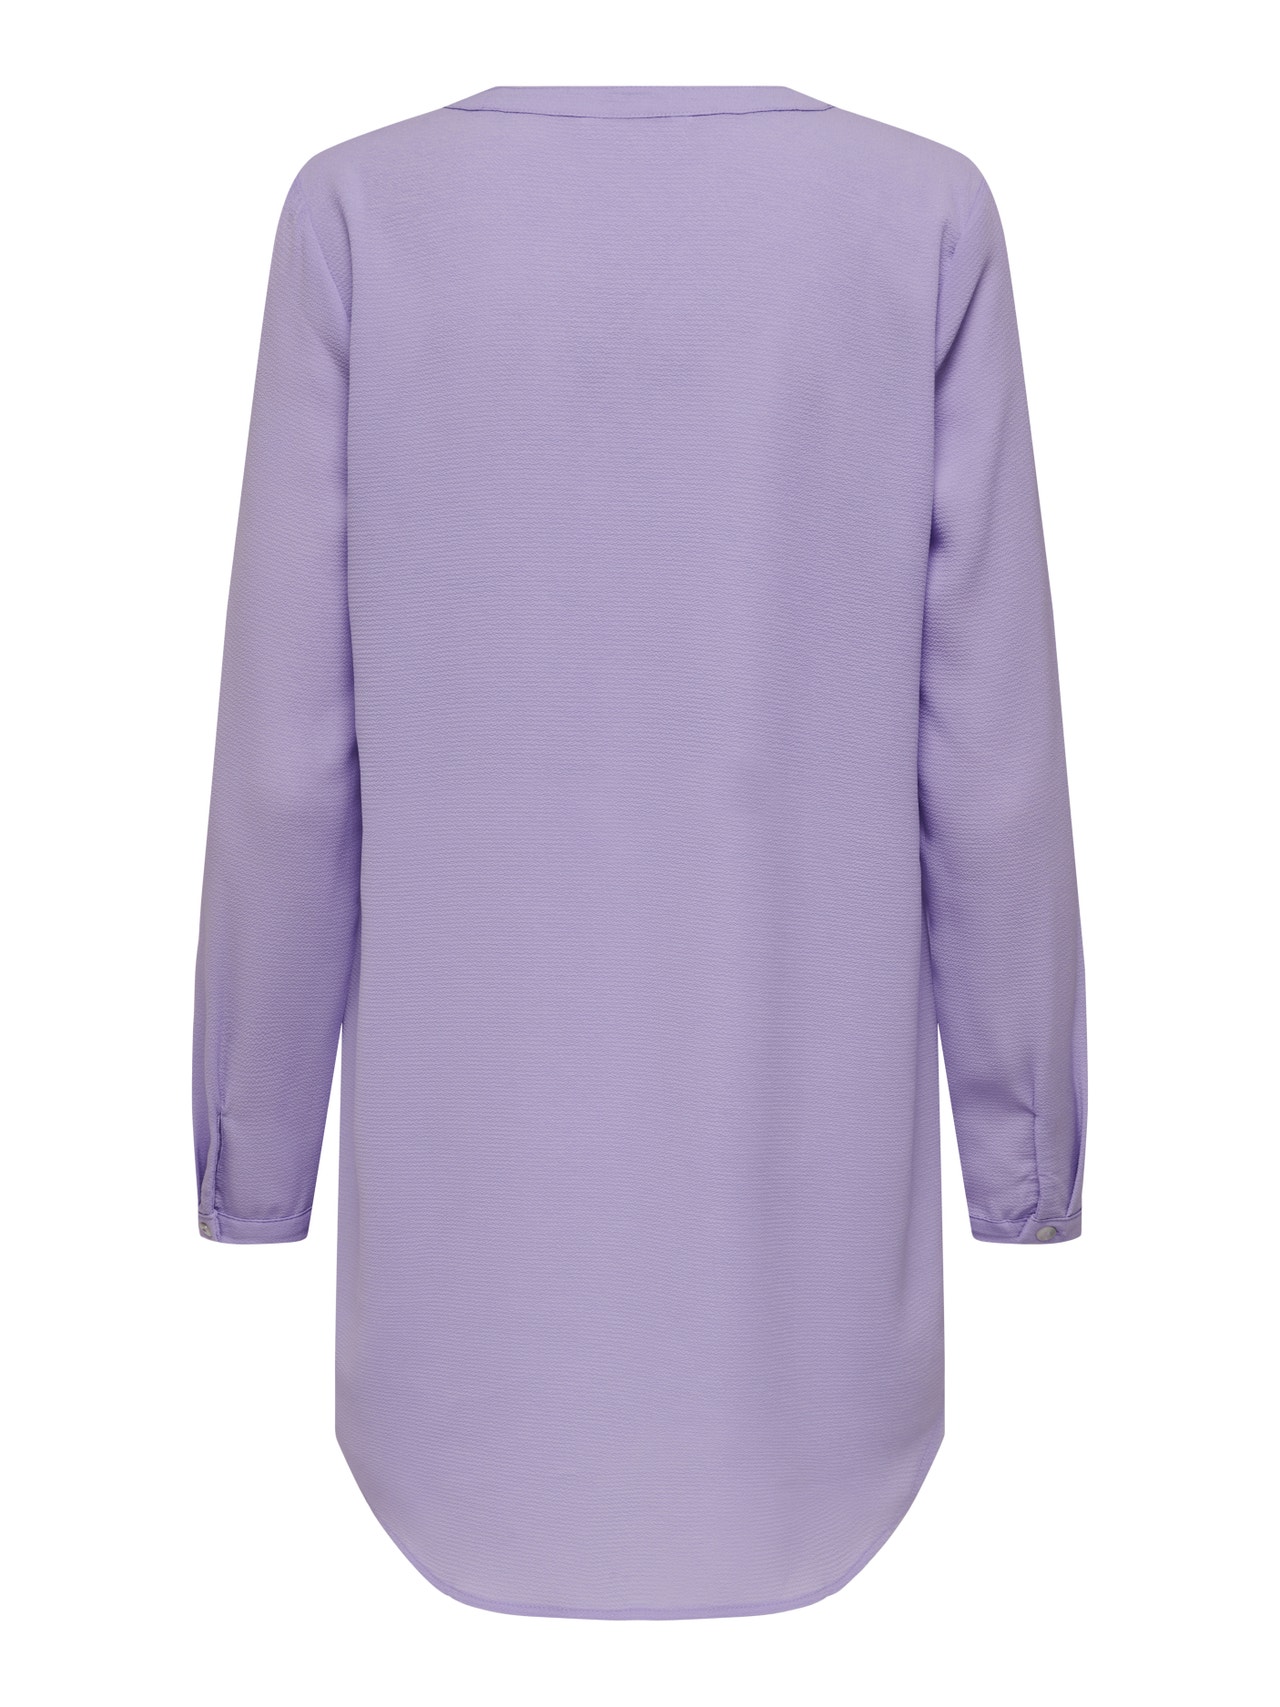 Long Sleeved Fitted Shirt - OBSOLETES DO NOT TOUCH 1A5JH7